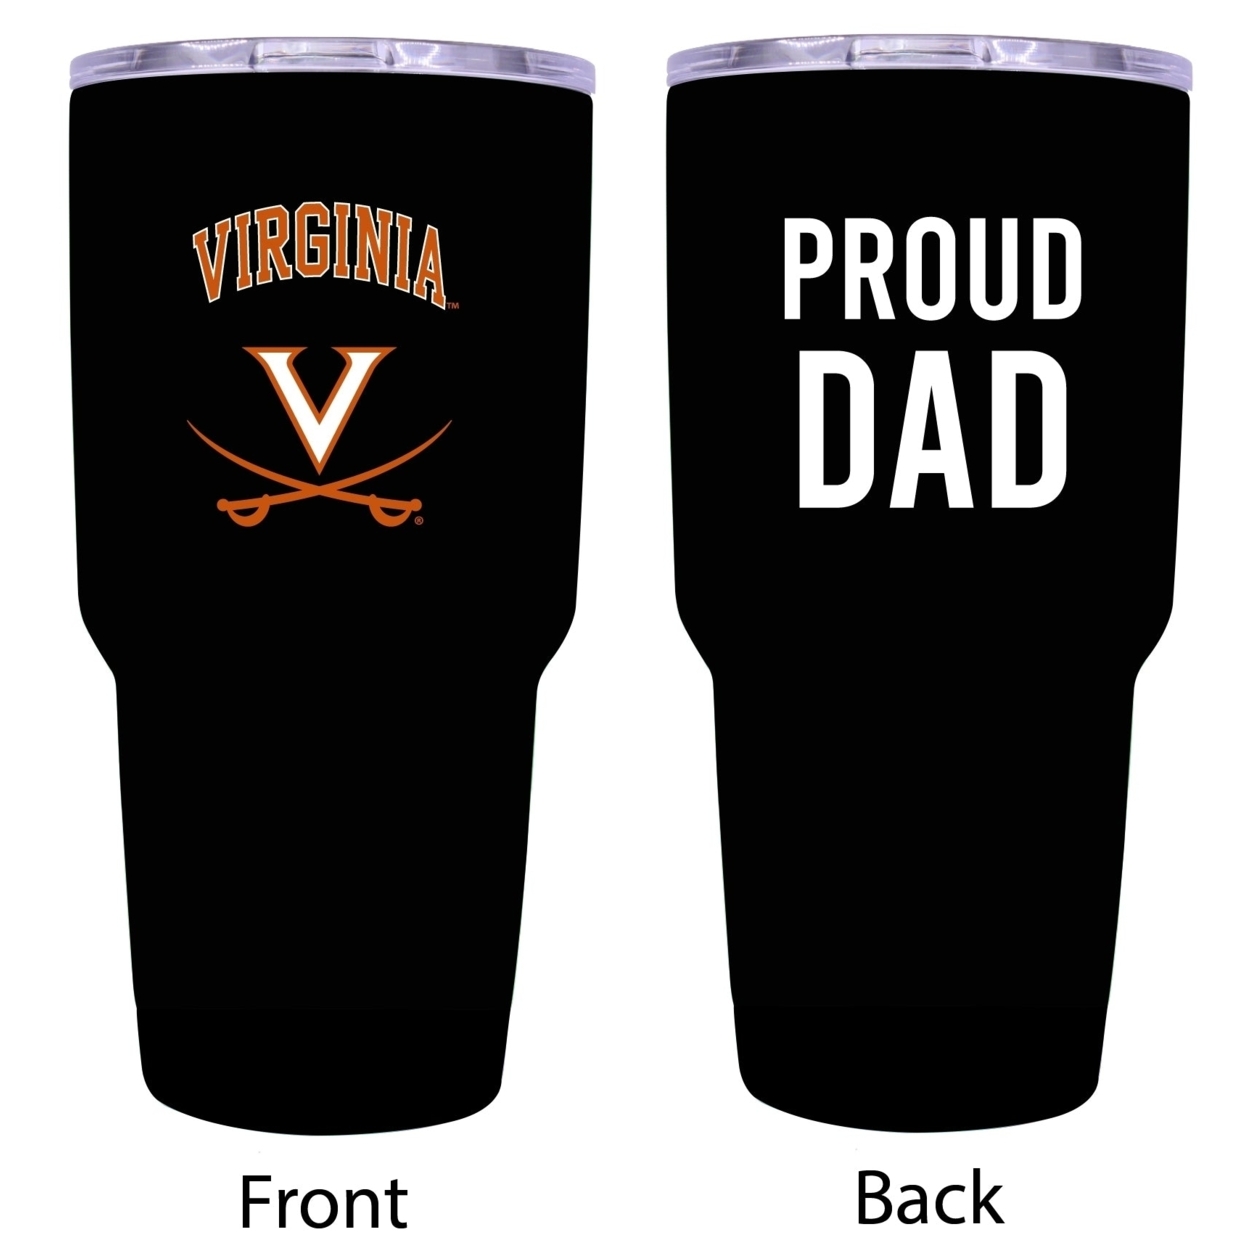 Virginia Cavaliers Proud Dad 24 Oz Insulated Stainless Steel Tumblers Choose Your Color.